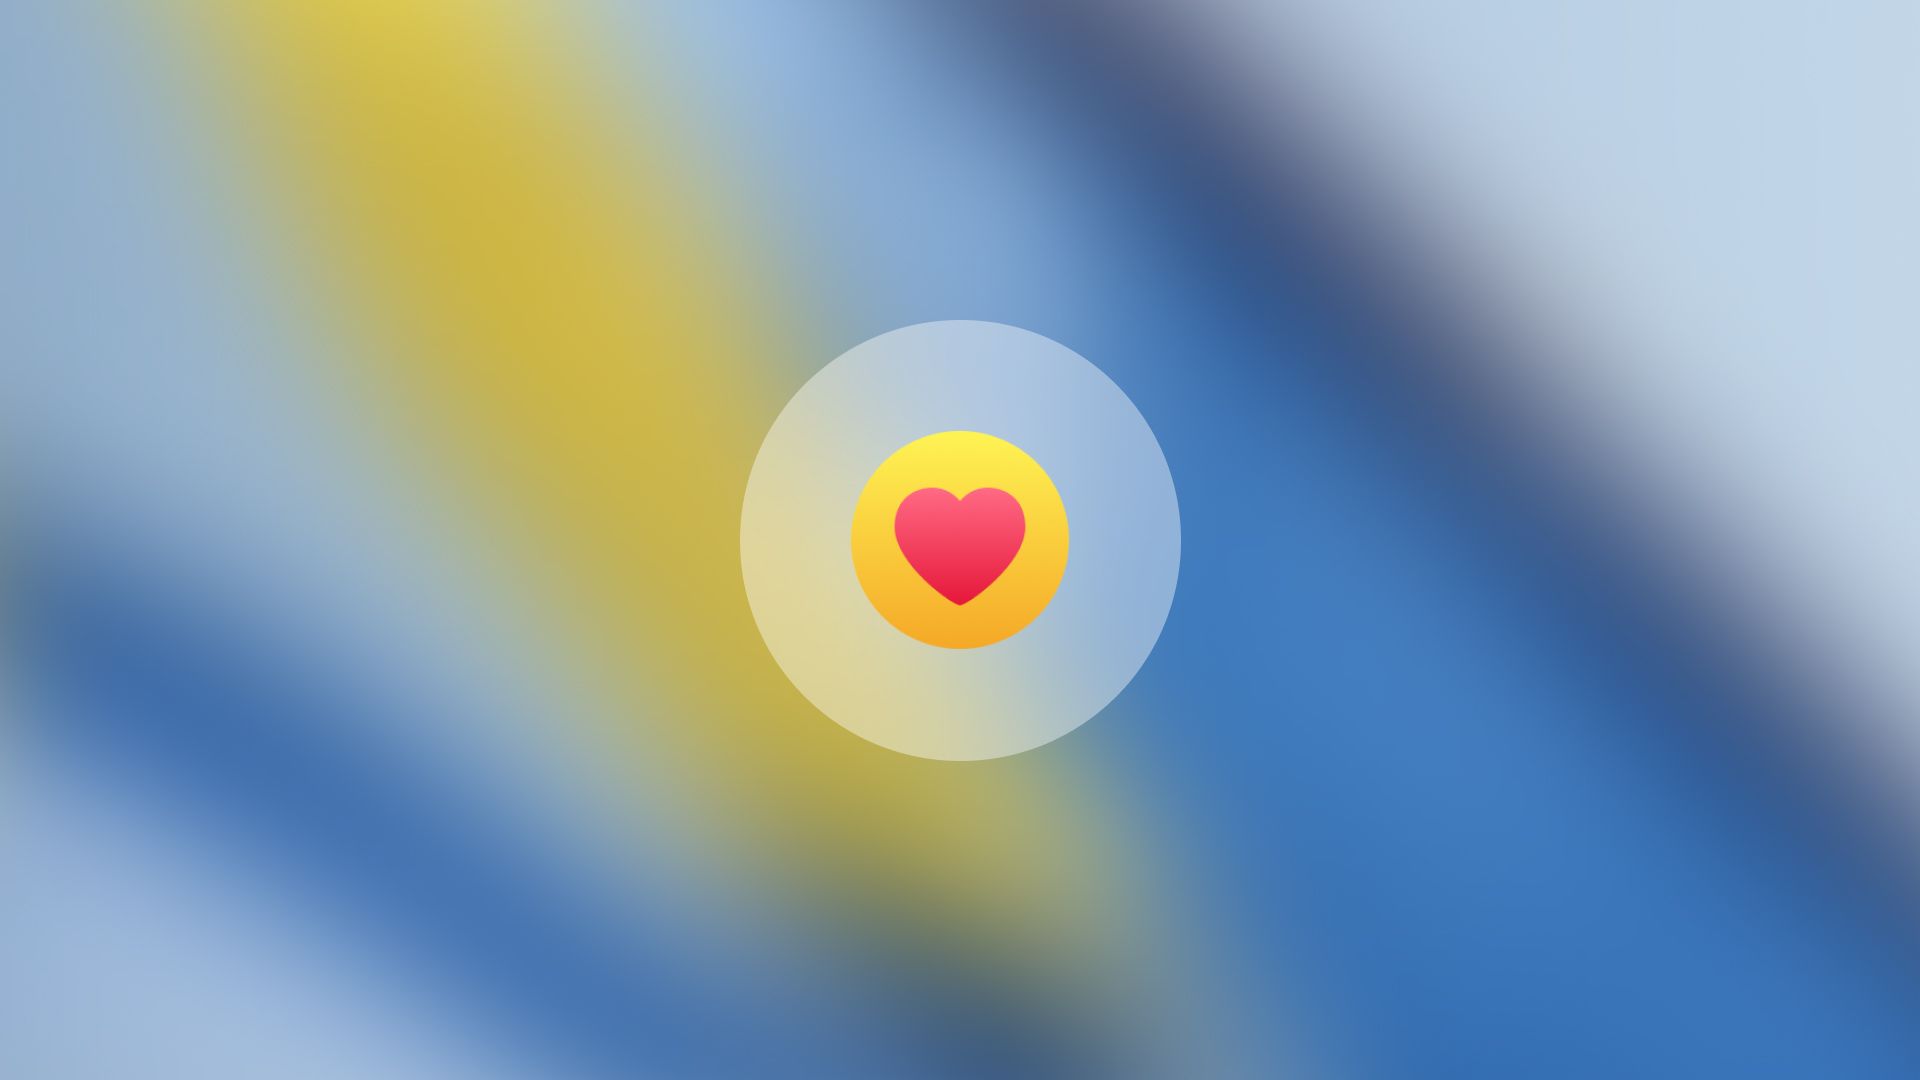 Graphic of heart on blurred background of blue and yellow